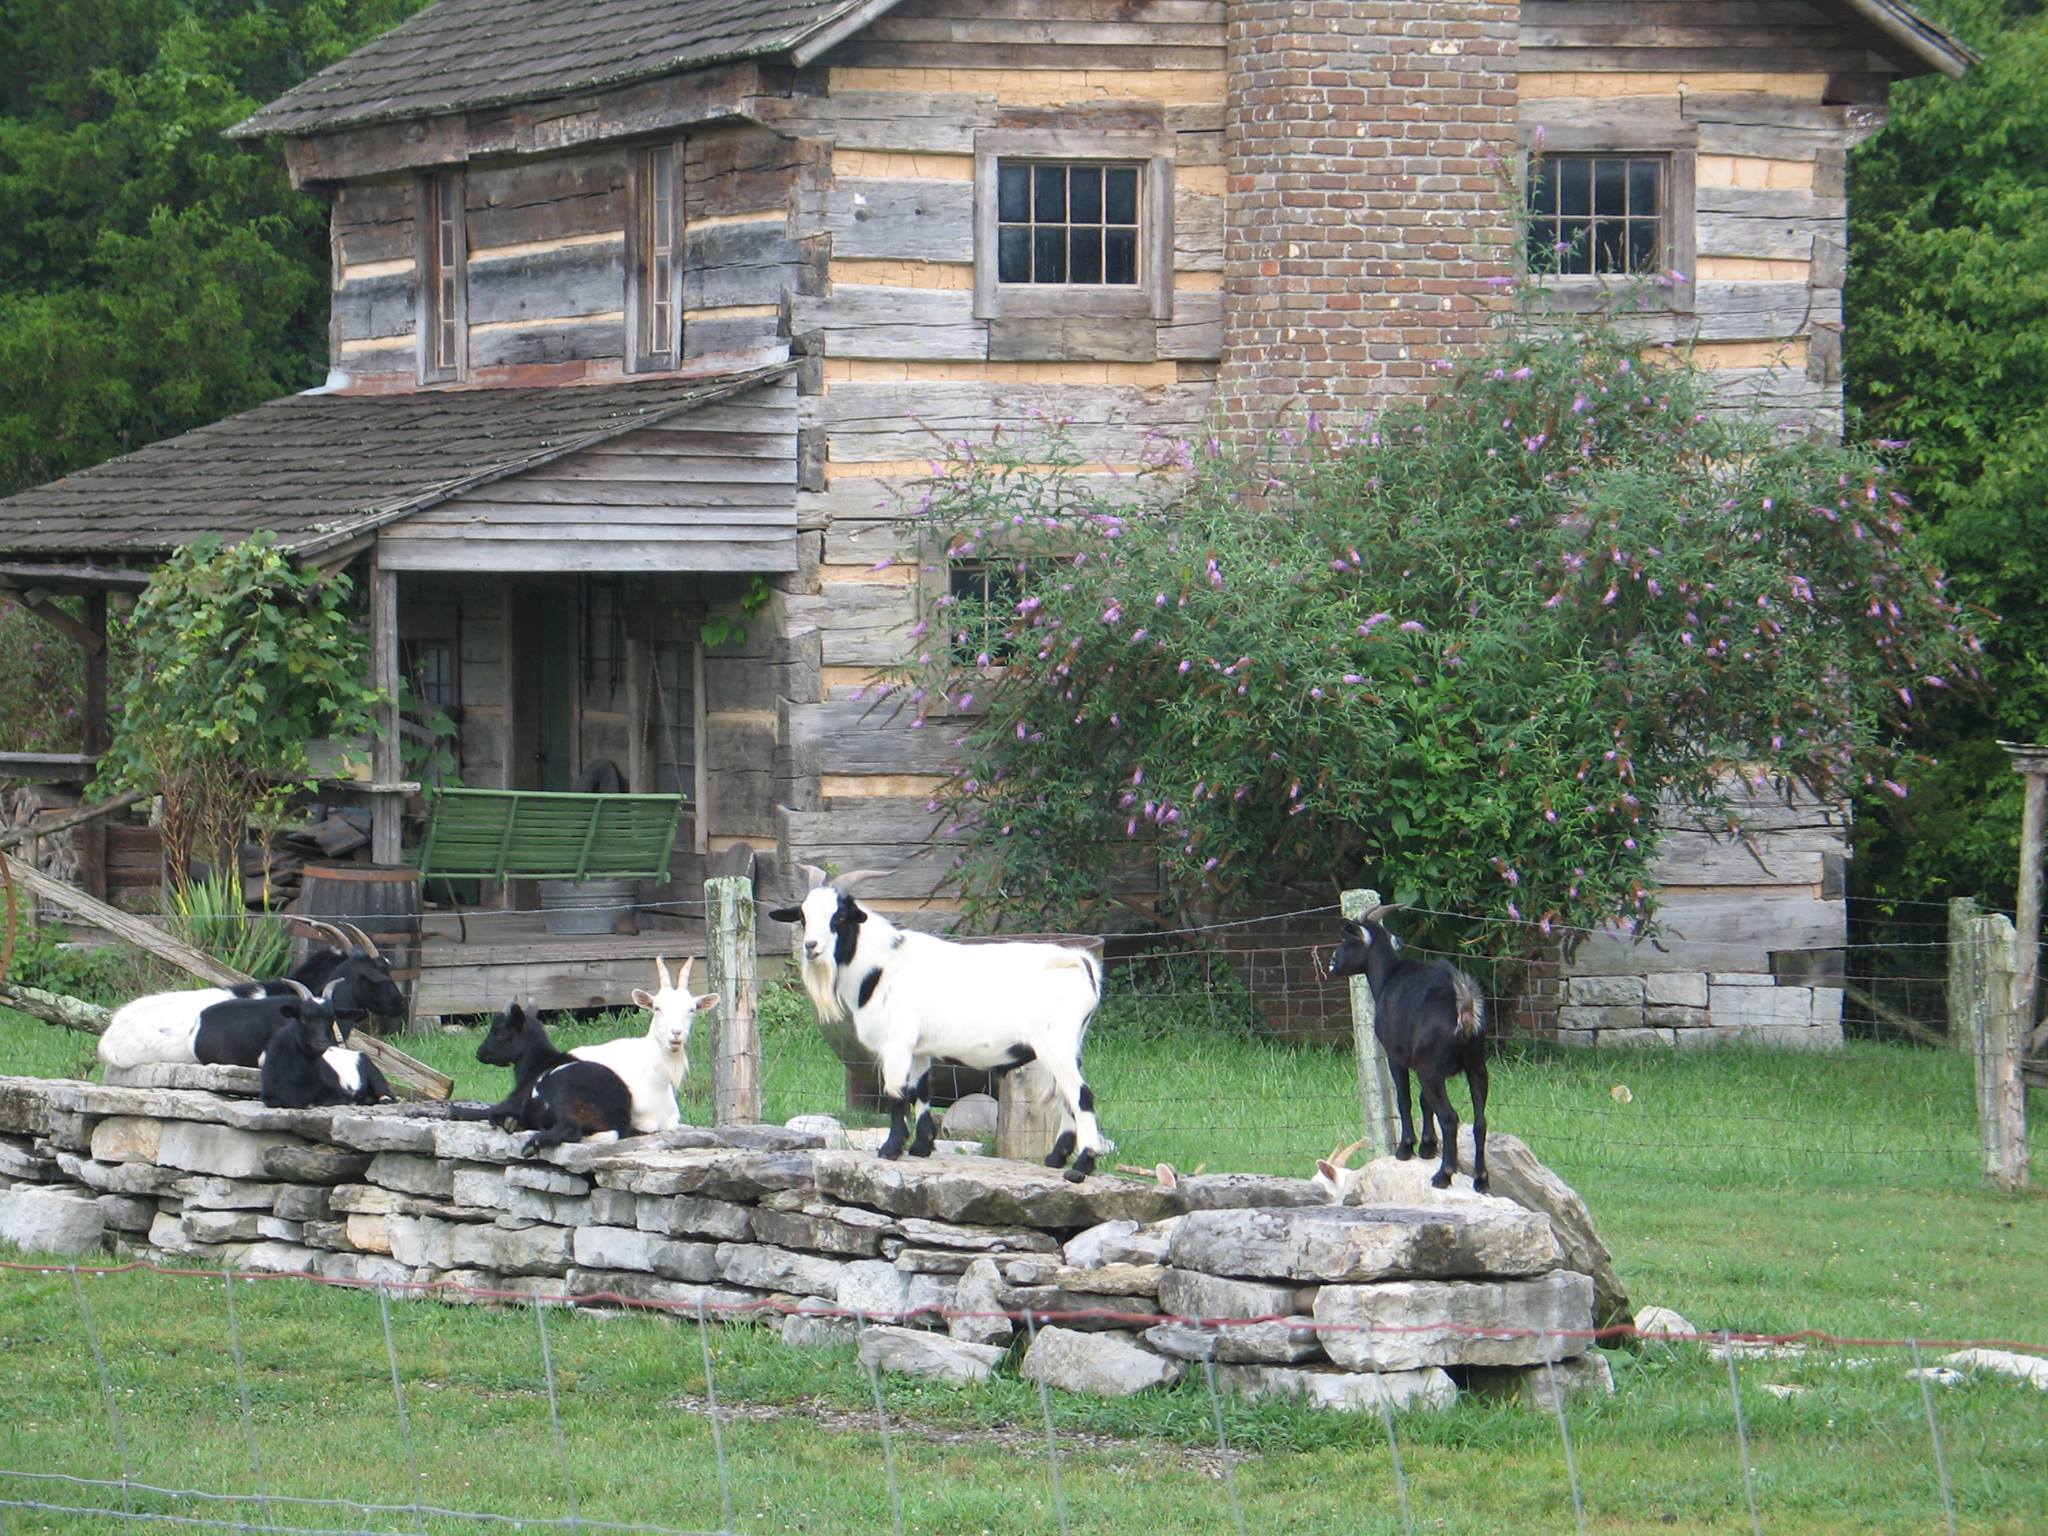 Some of the farm animals located on the grounds